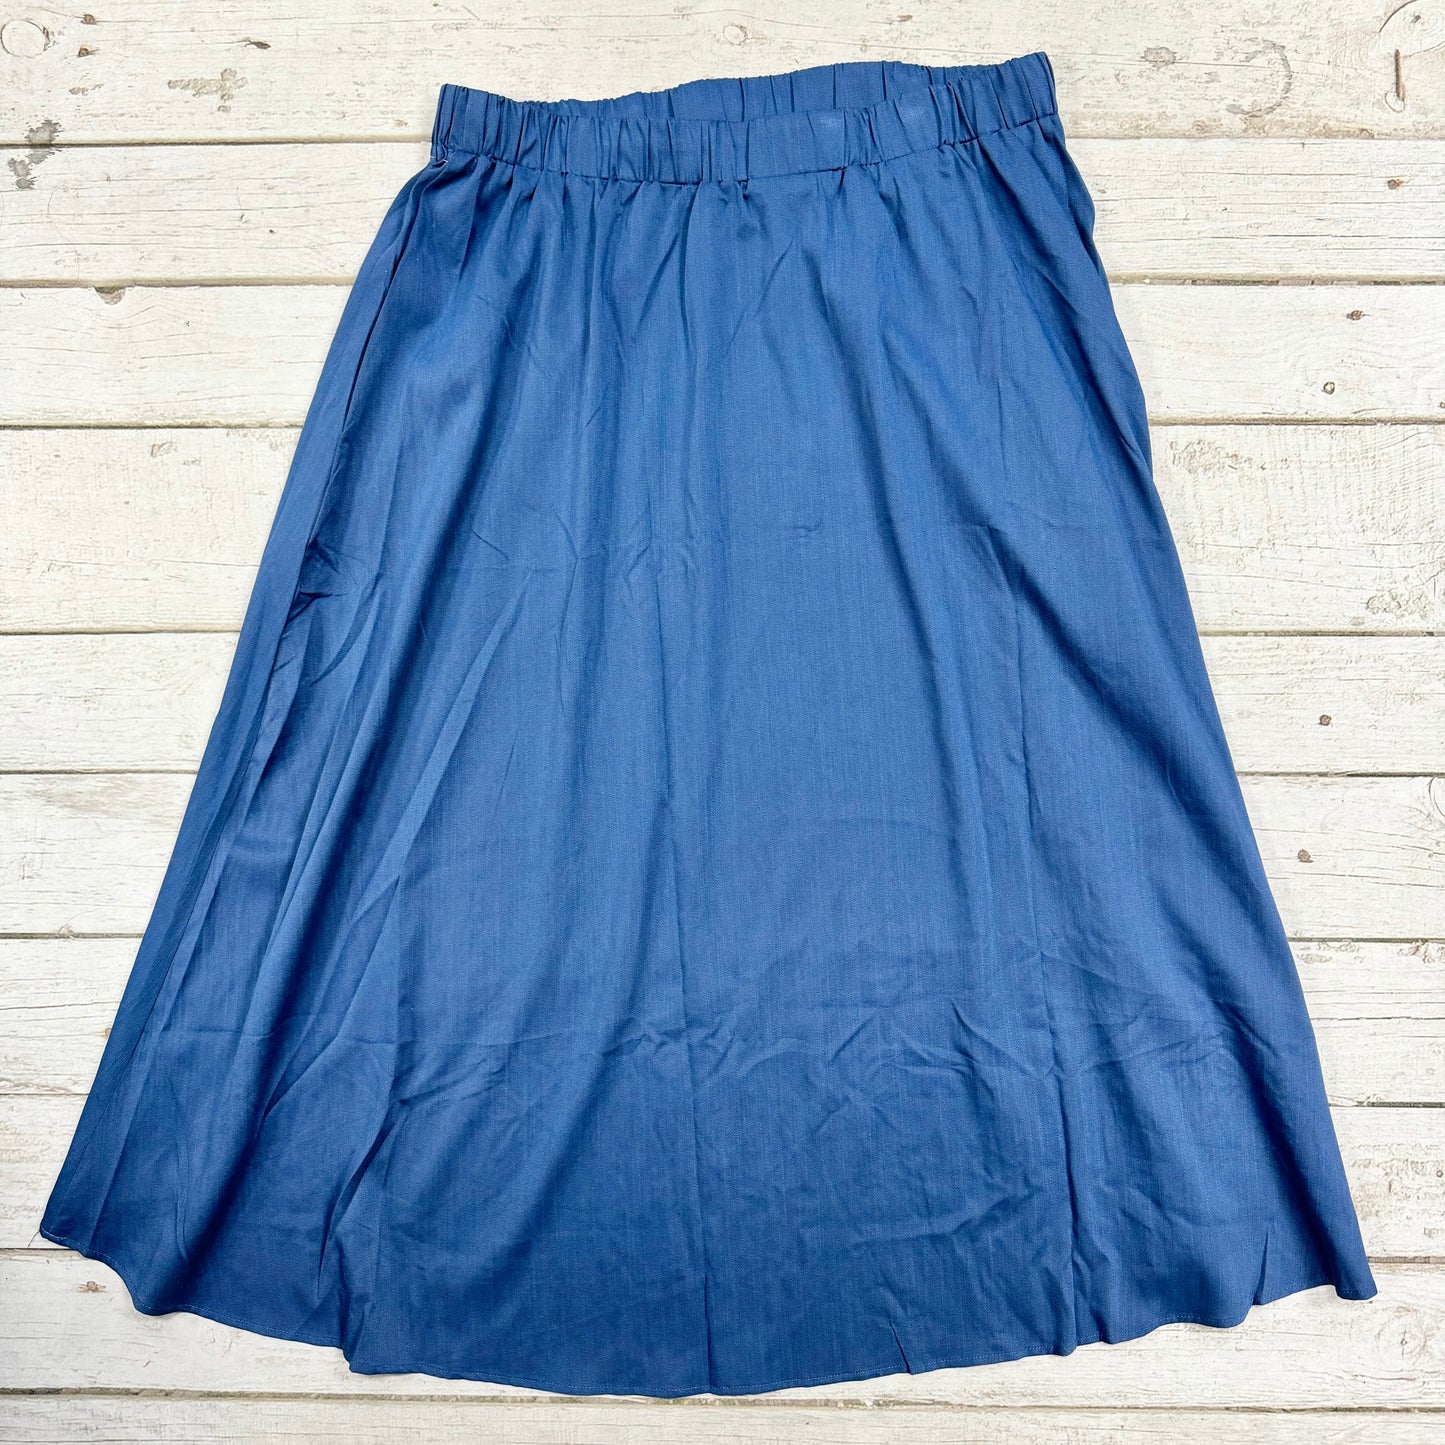 Skirt Maxi By Suzanne Betro  Size: 4x